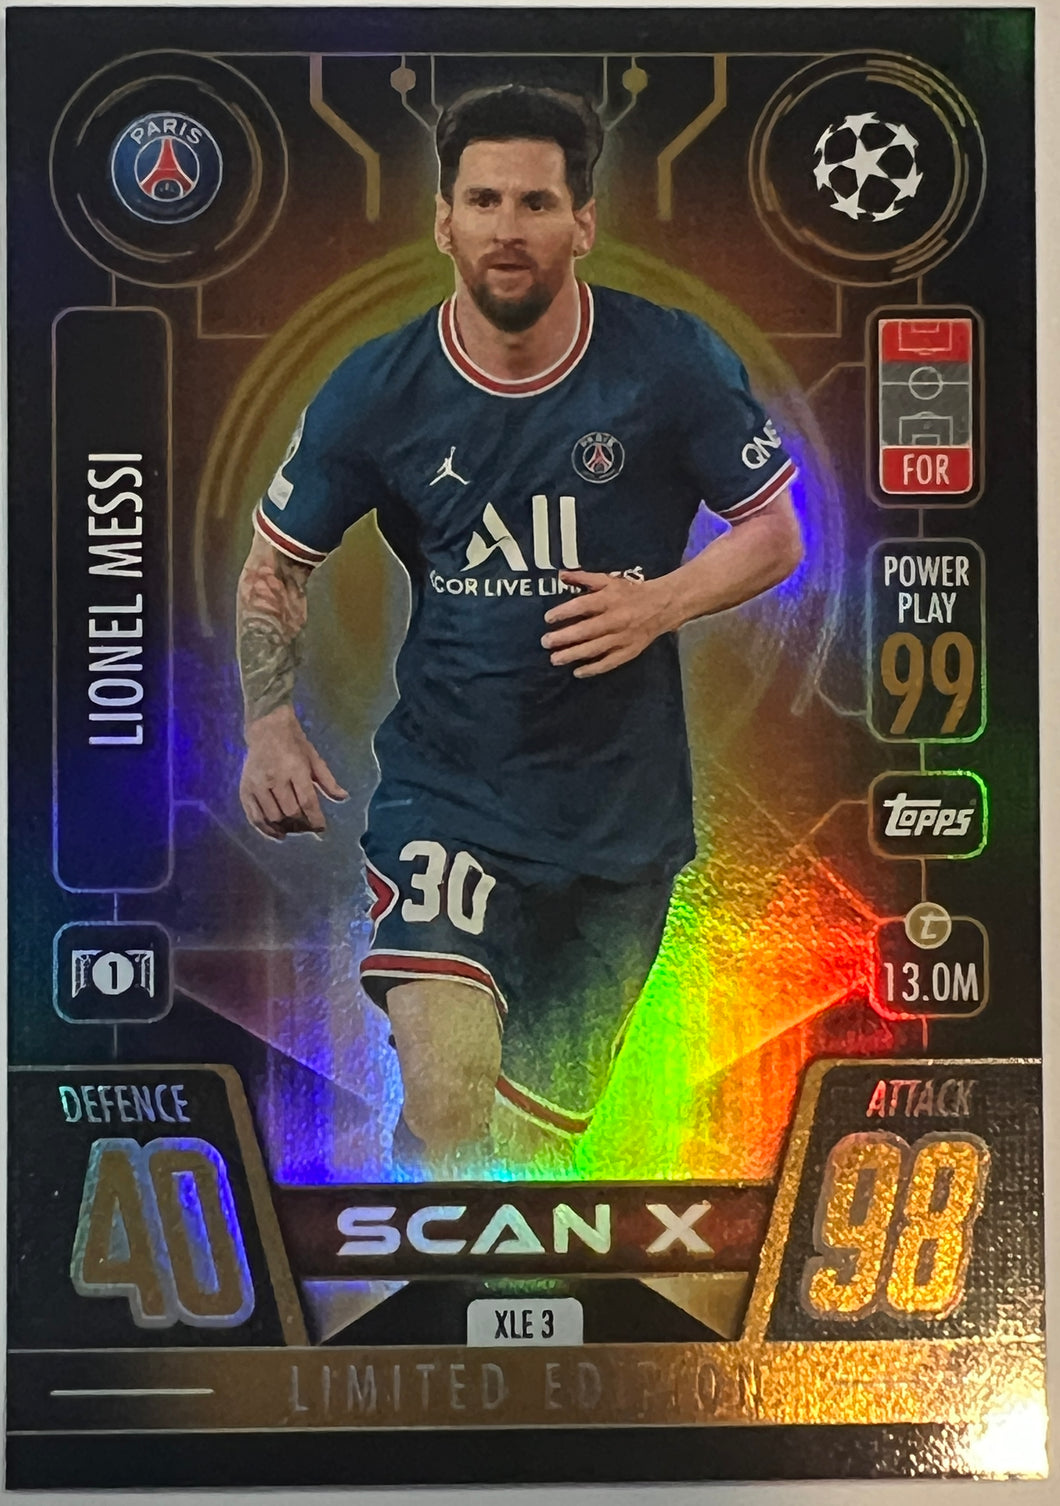 Lionel Messi XLE 3 Scan X 2021-22 Topps UCL Match Attax Extra PSG Rare Insert